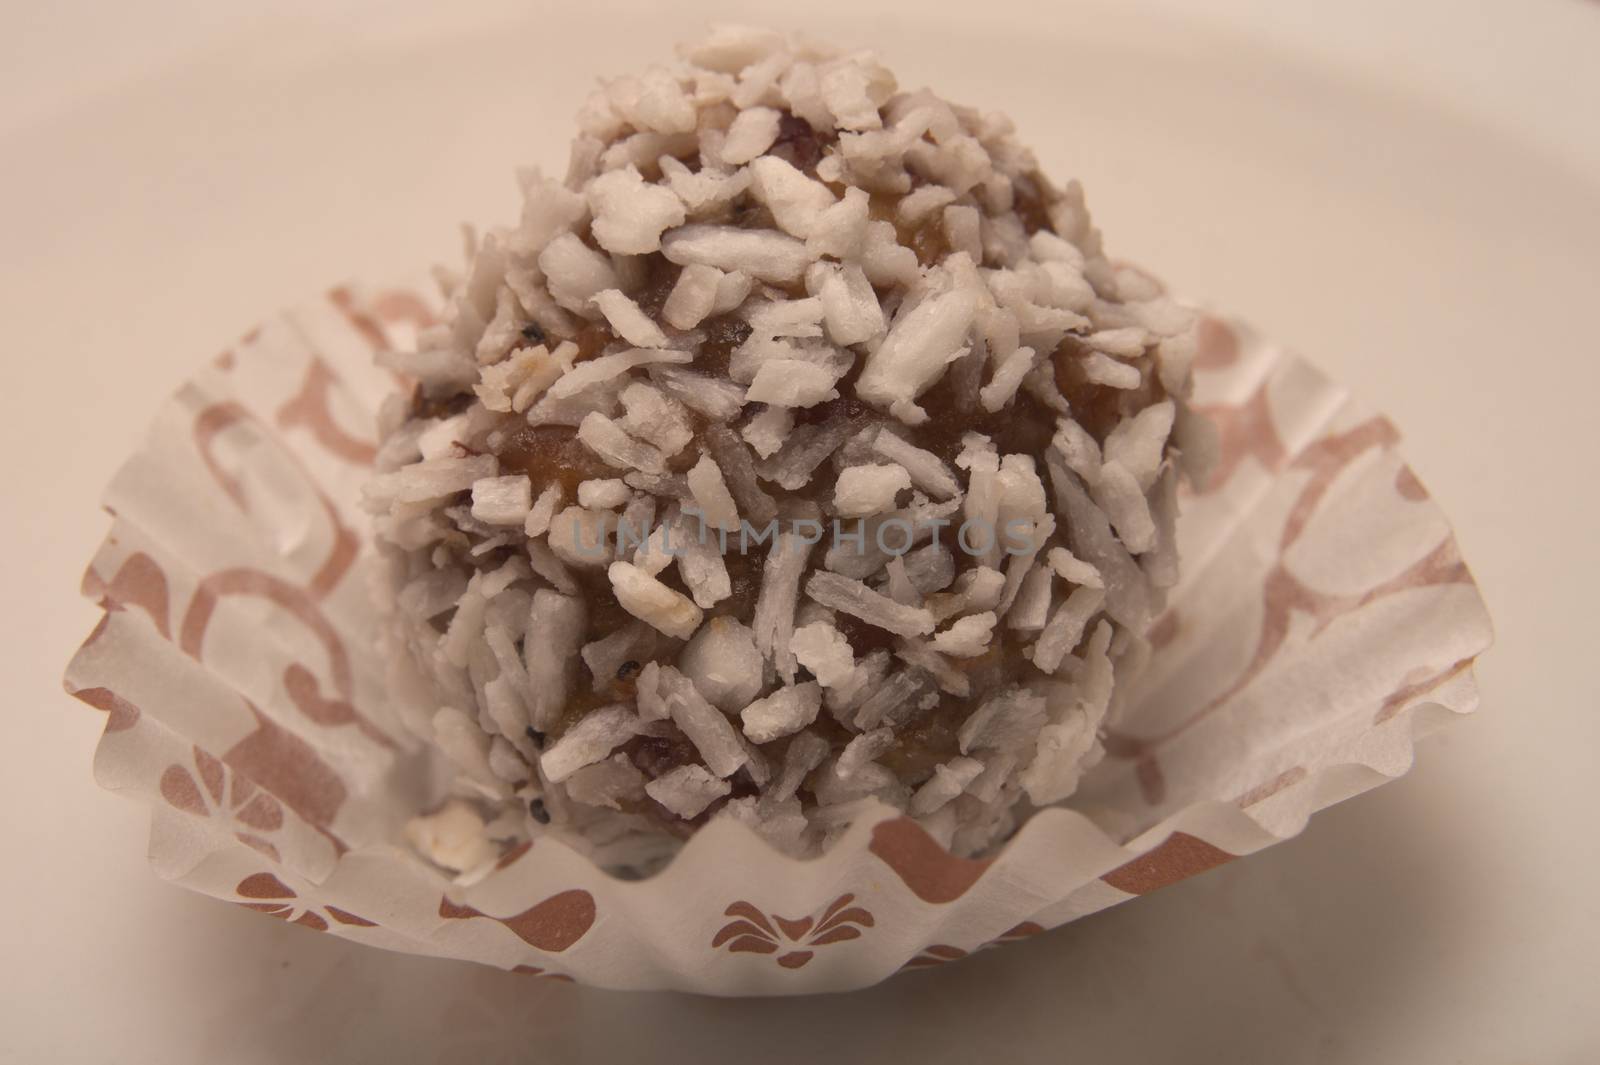 One small sweet round decert made from chocolate, covered with white coconut shavings placed in paper wrapper